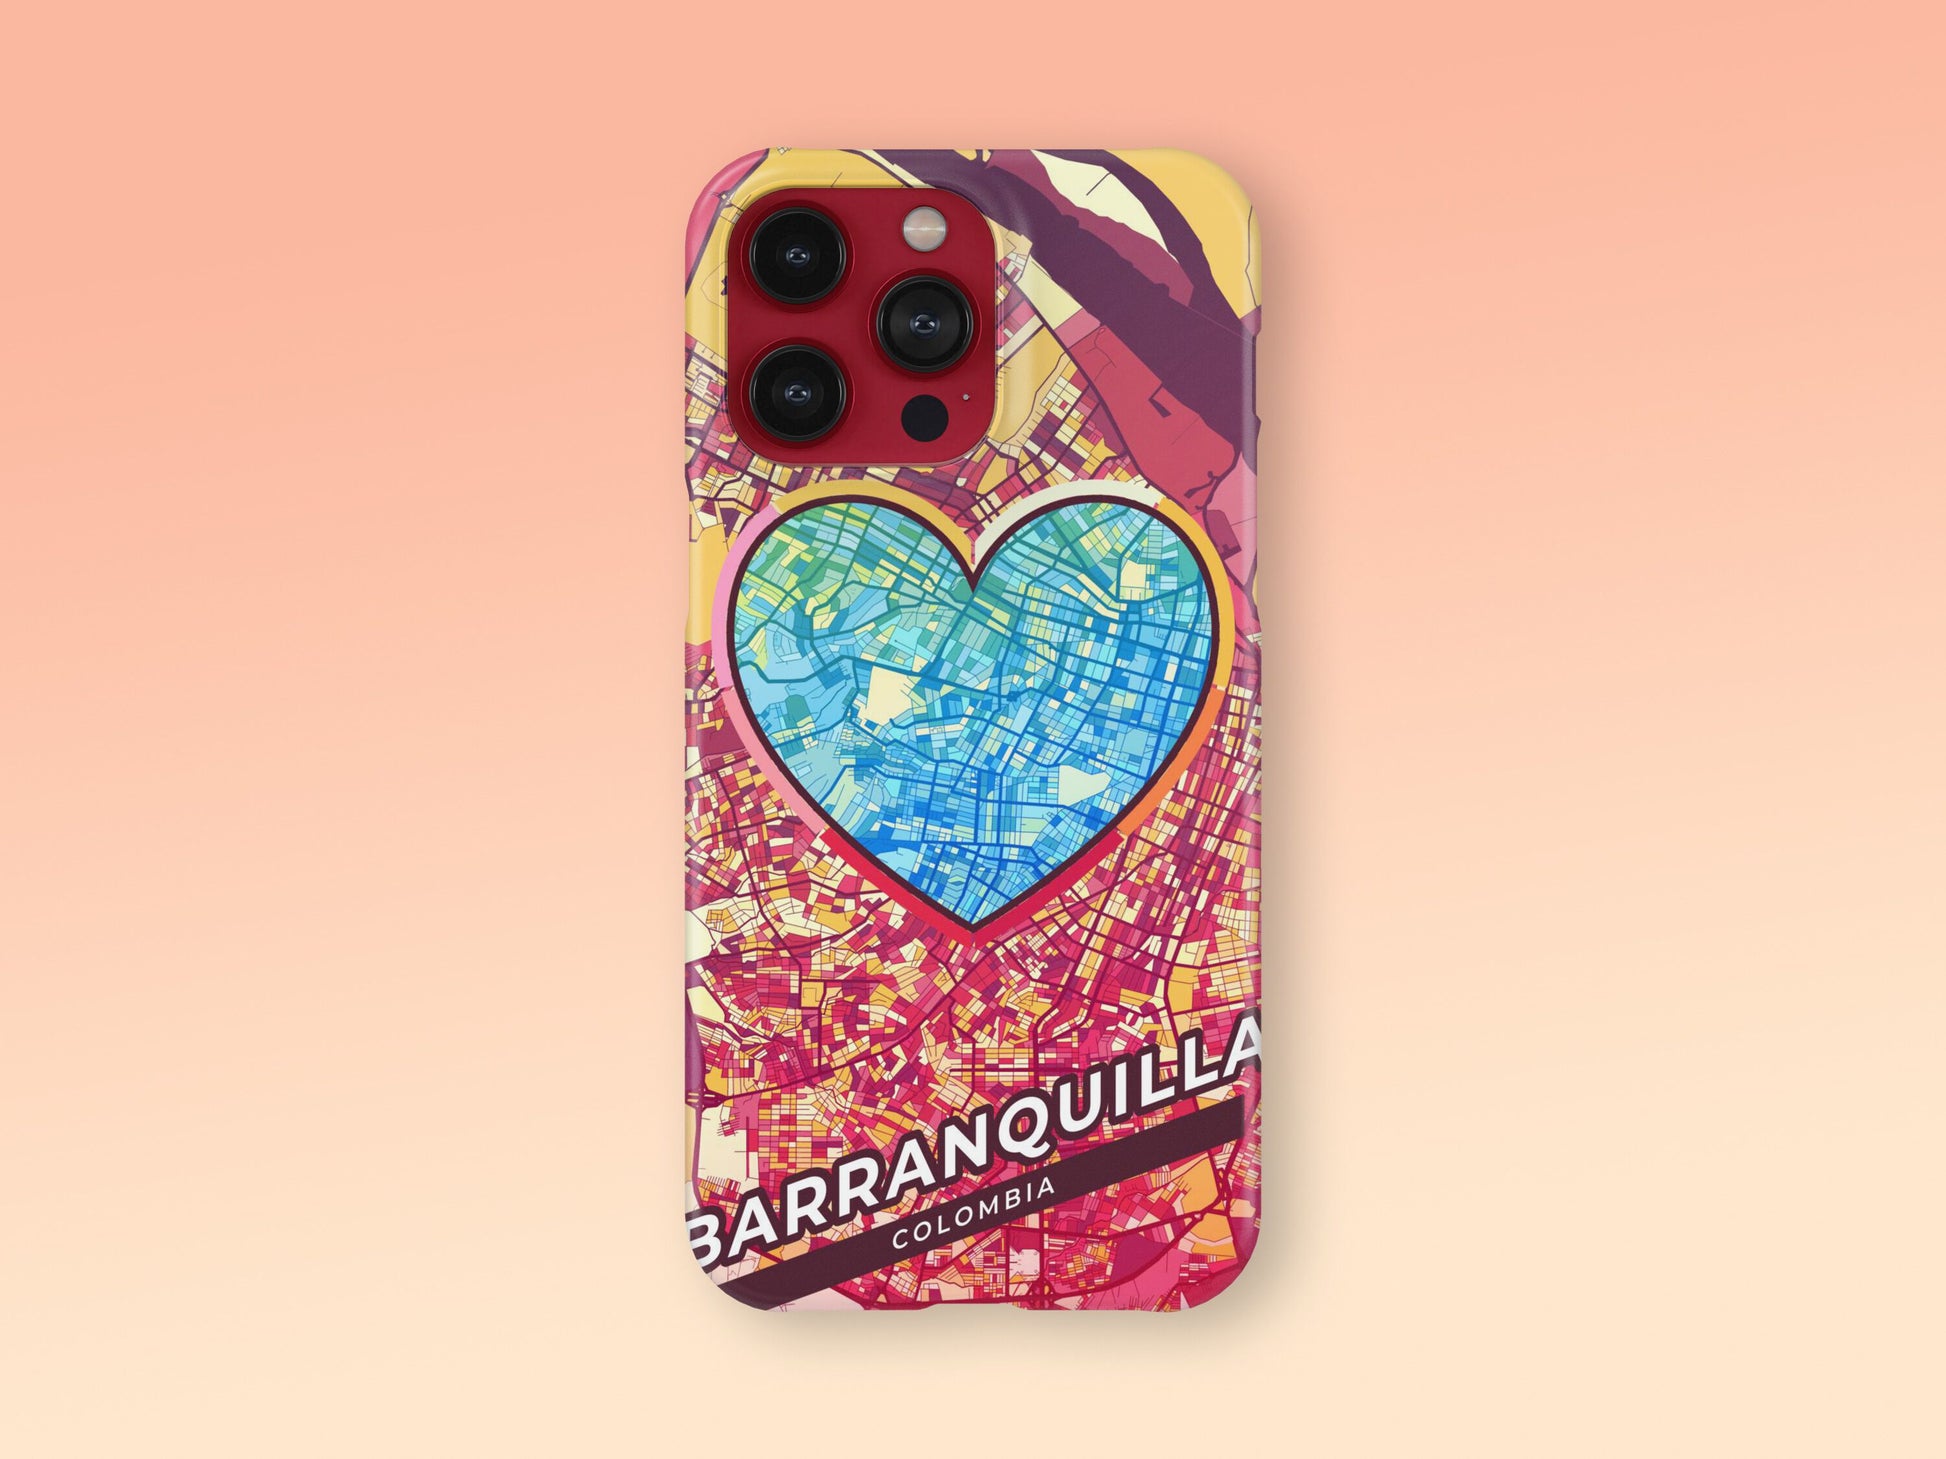 Barranquilla Colombia slim phone case with colorful icon. Birthday, wedding or housewarming gift. Couple match cases. 2